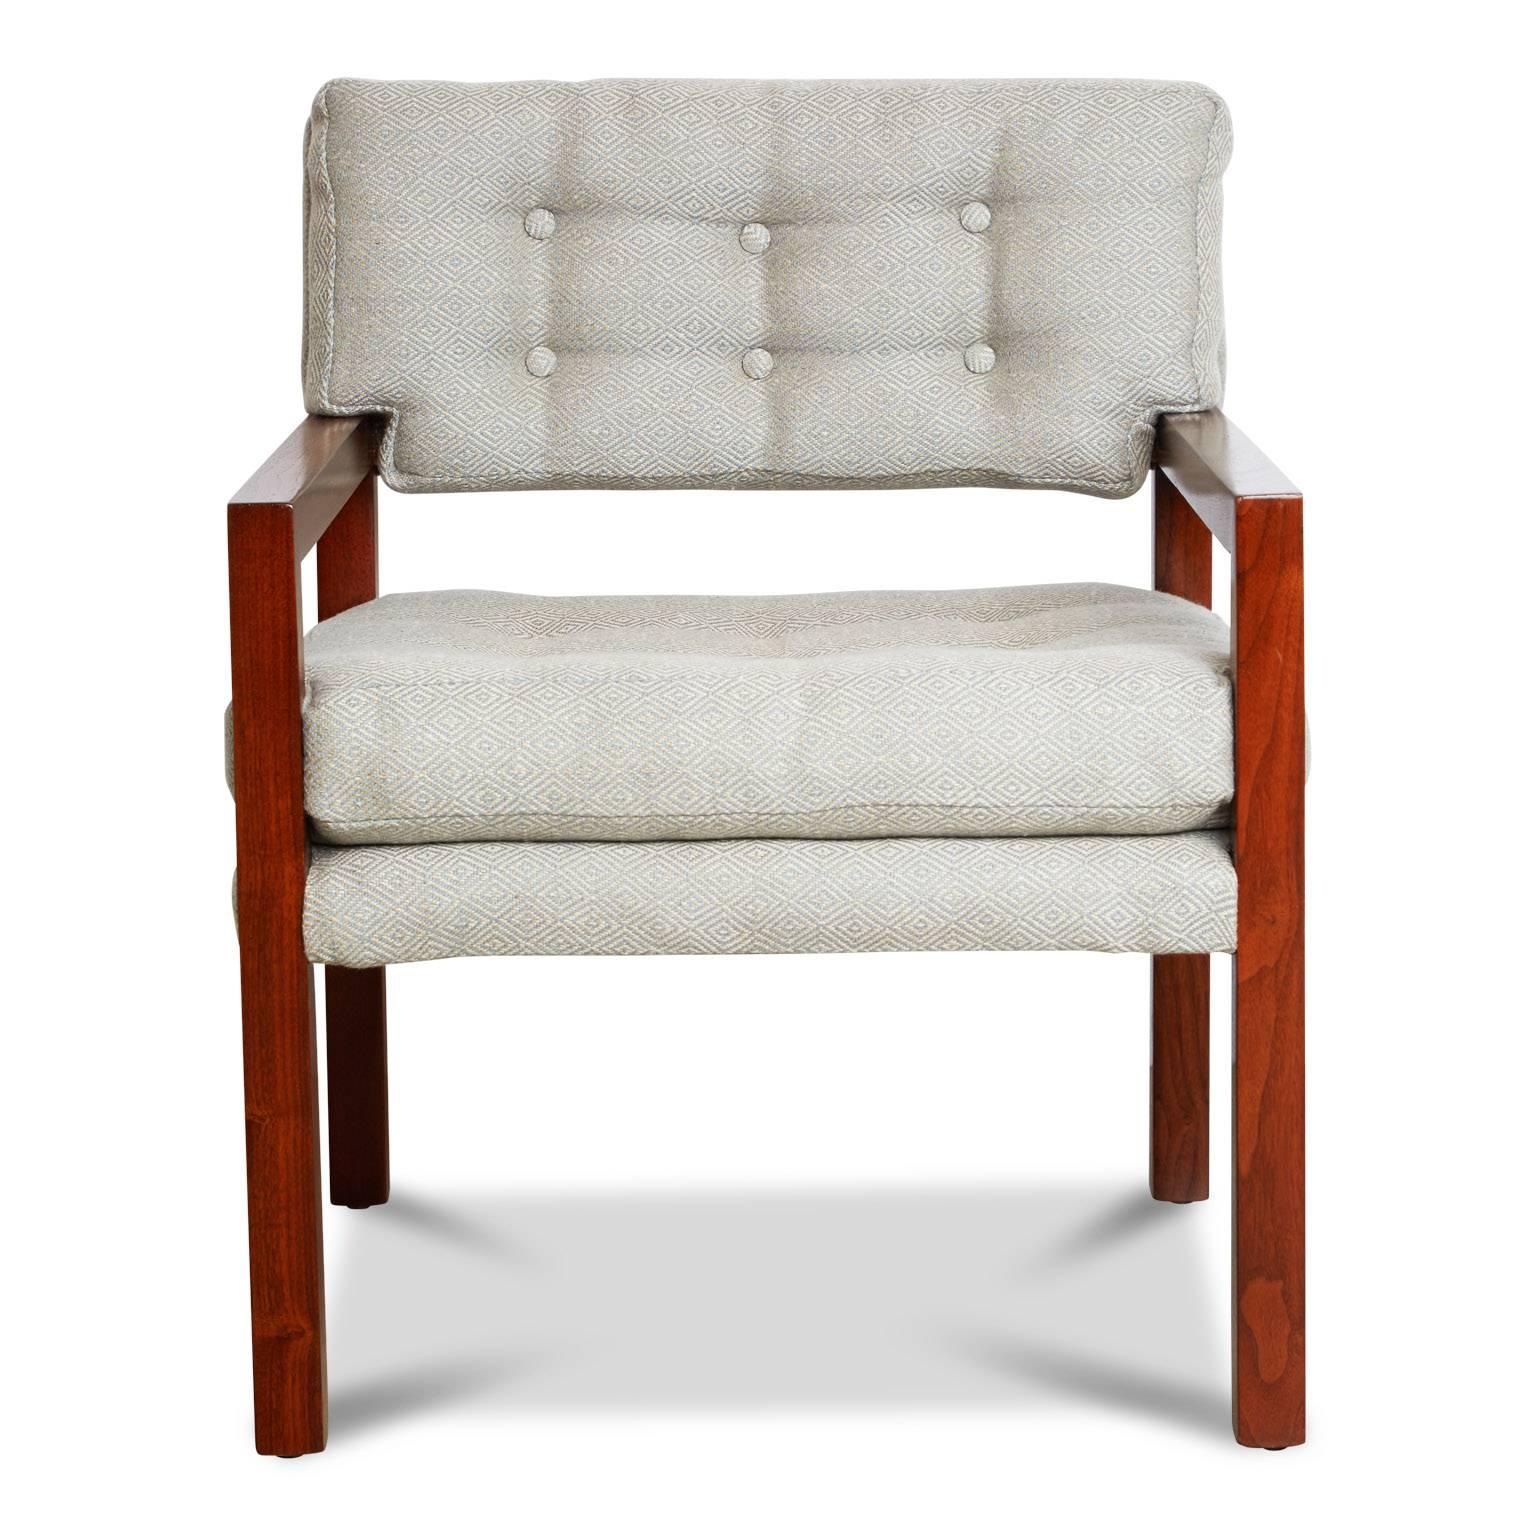 Pair of solid walnut framed armchairs recently refinished in satin lacquer as well as being newly upholstered and button tufted using a light blue and cream woven geometric fabric. 

These graceful armchairs would be ideal in a living room, study,